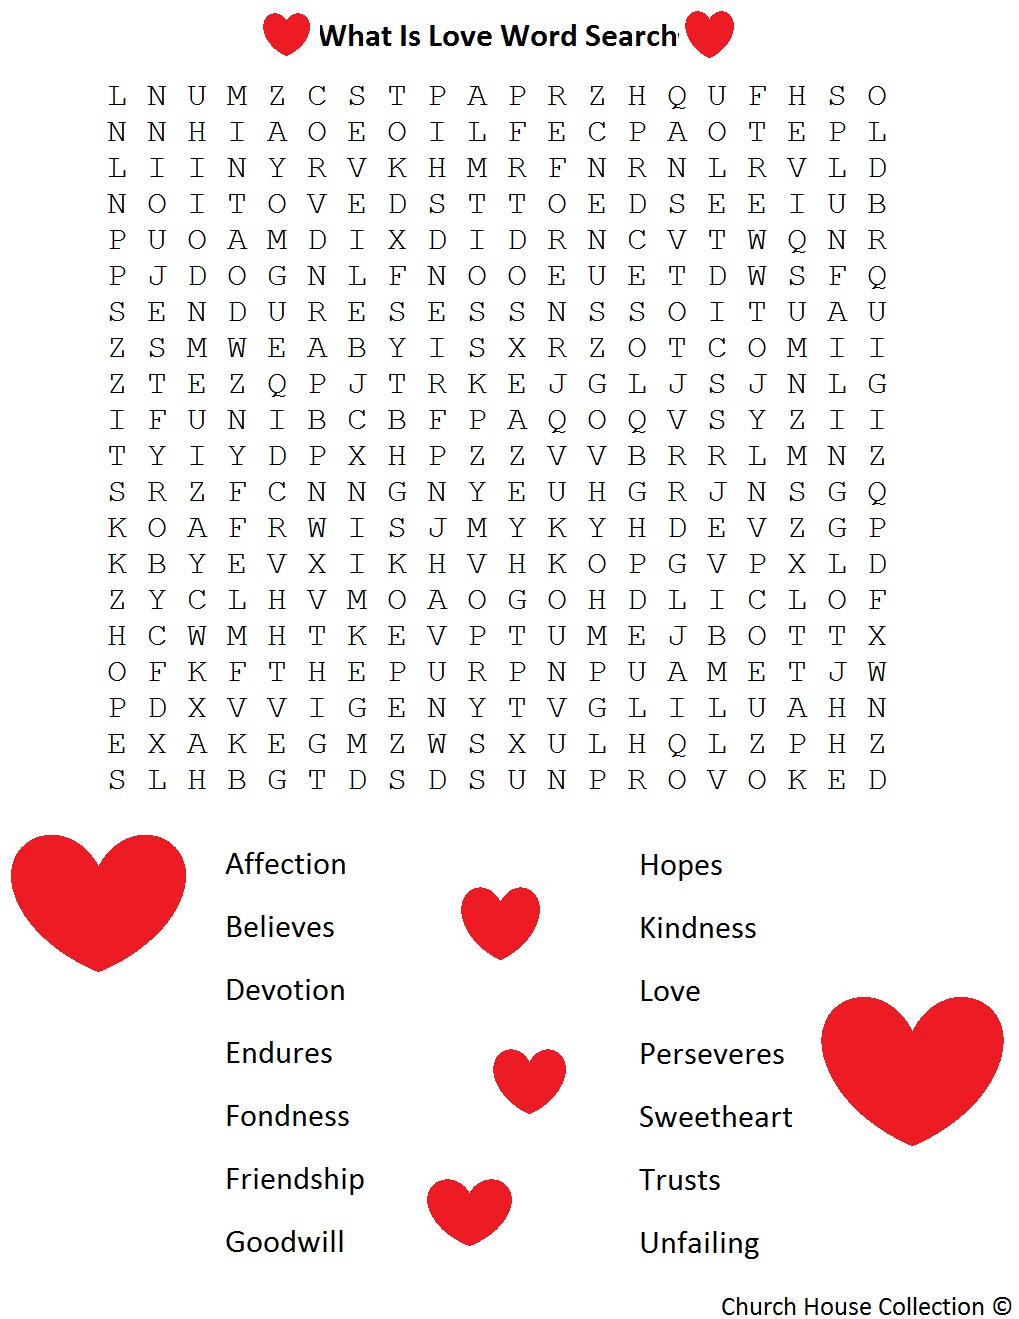 Church House Collection Blog: Valentine Word Search For Kids "What Is Love"